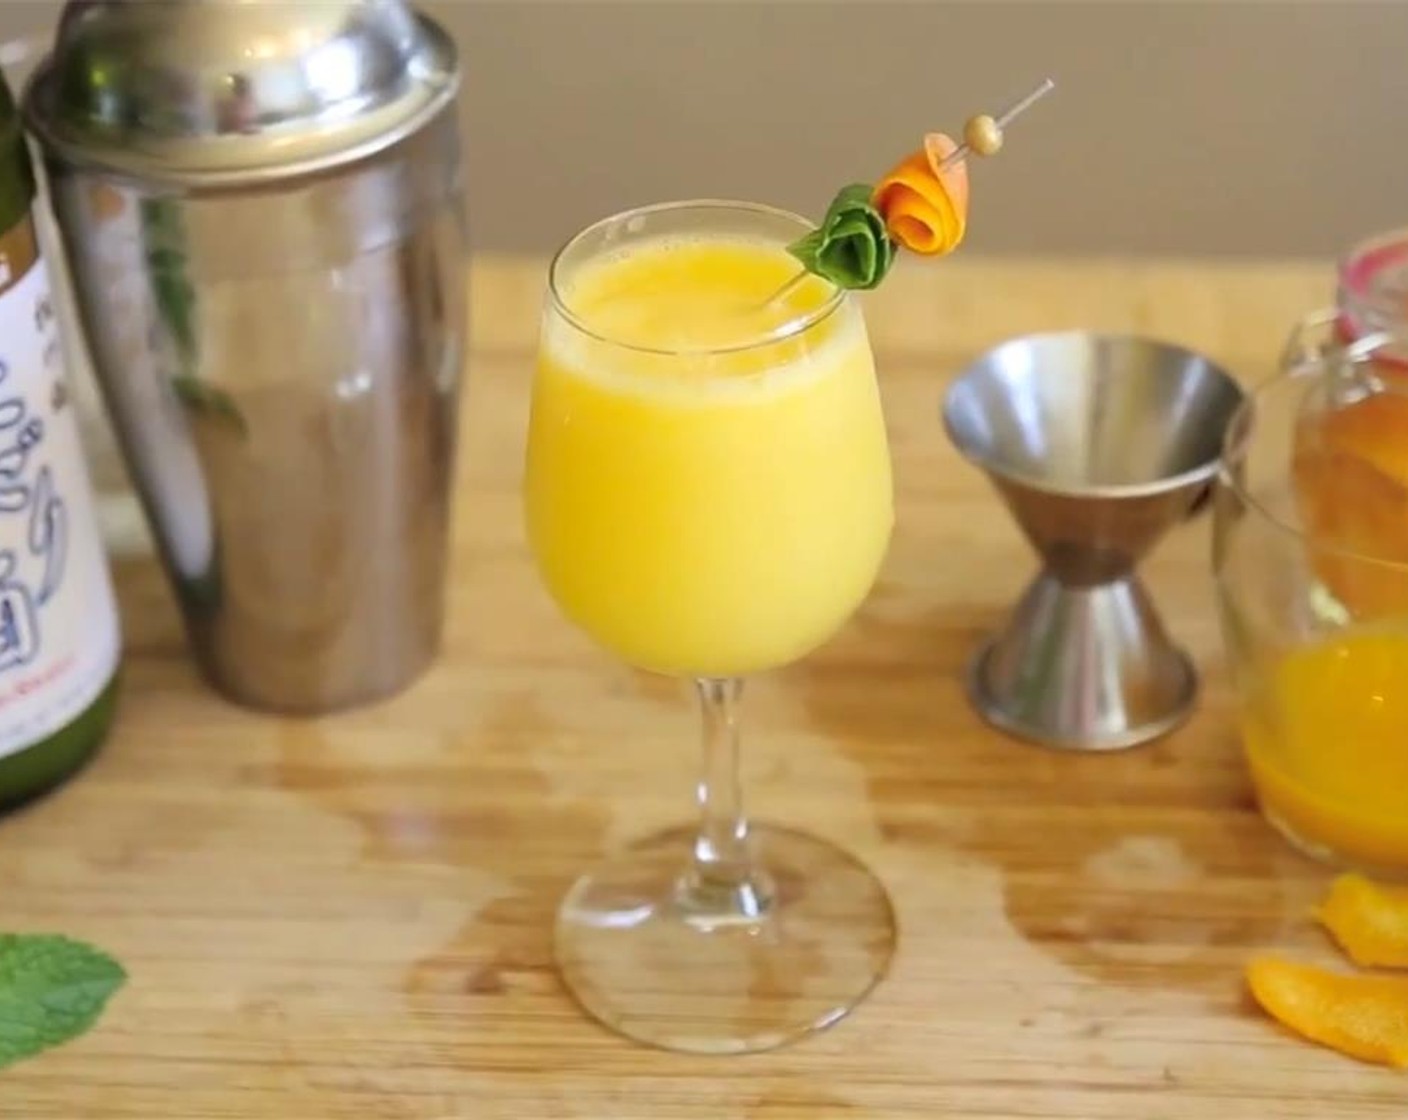 step 3 Strain into a glass, garnish with an orange peel and Fresh Mint (1 sprig), serve, and enjoy!